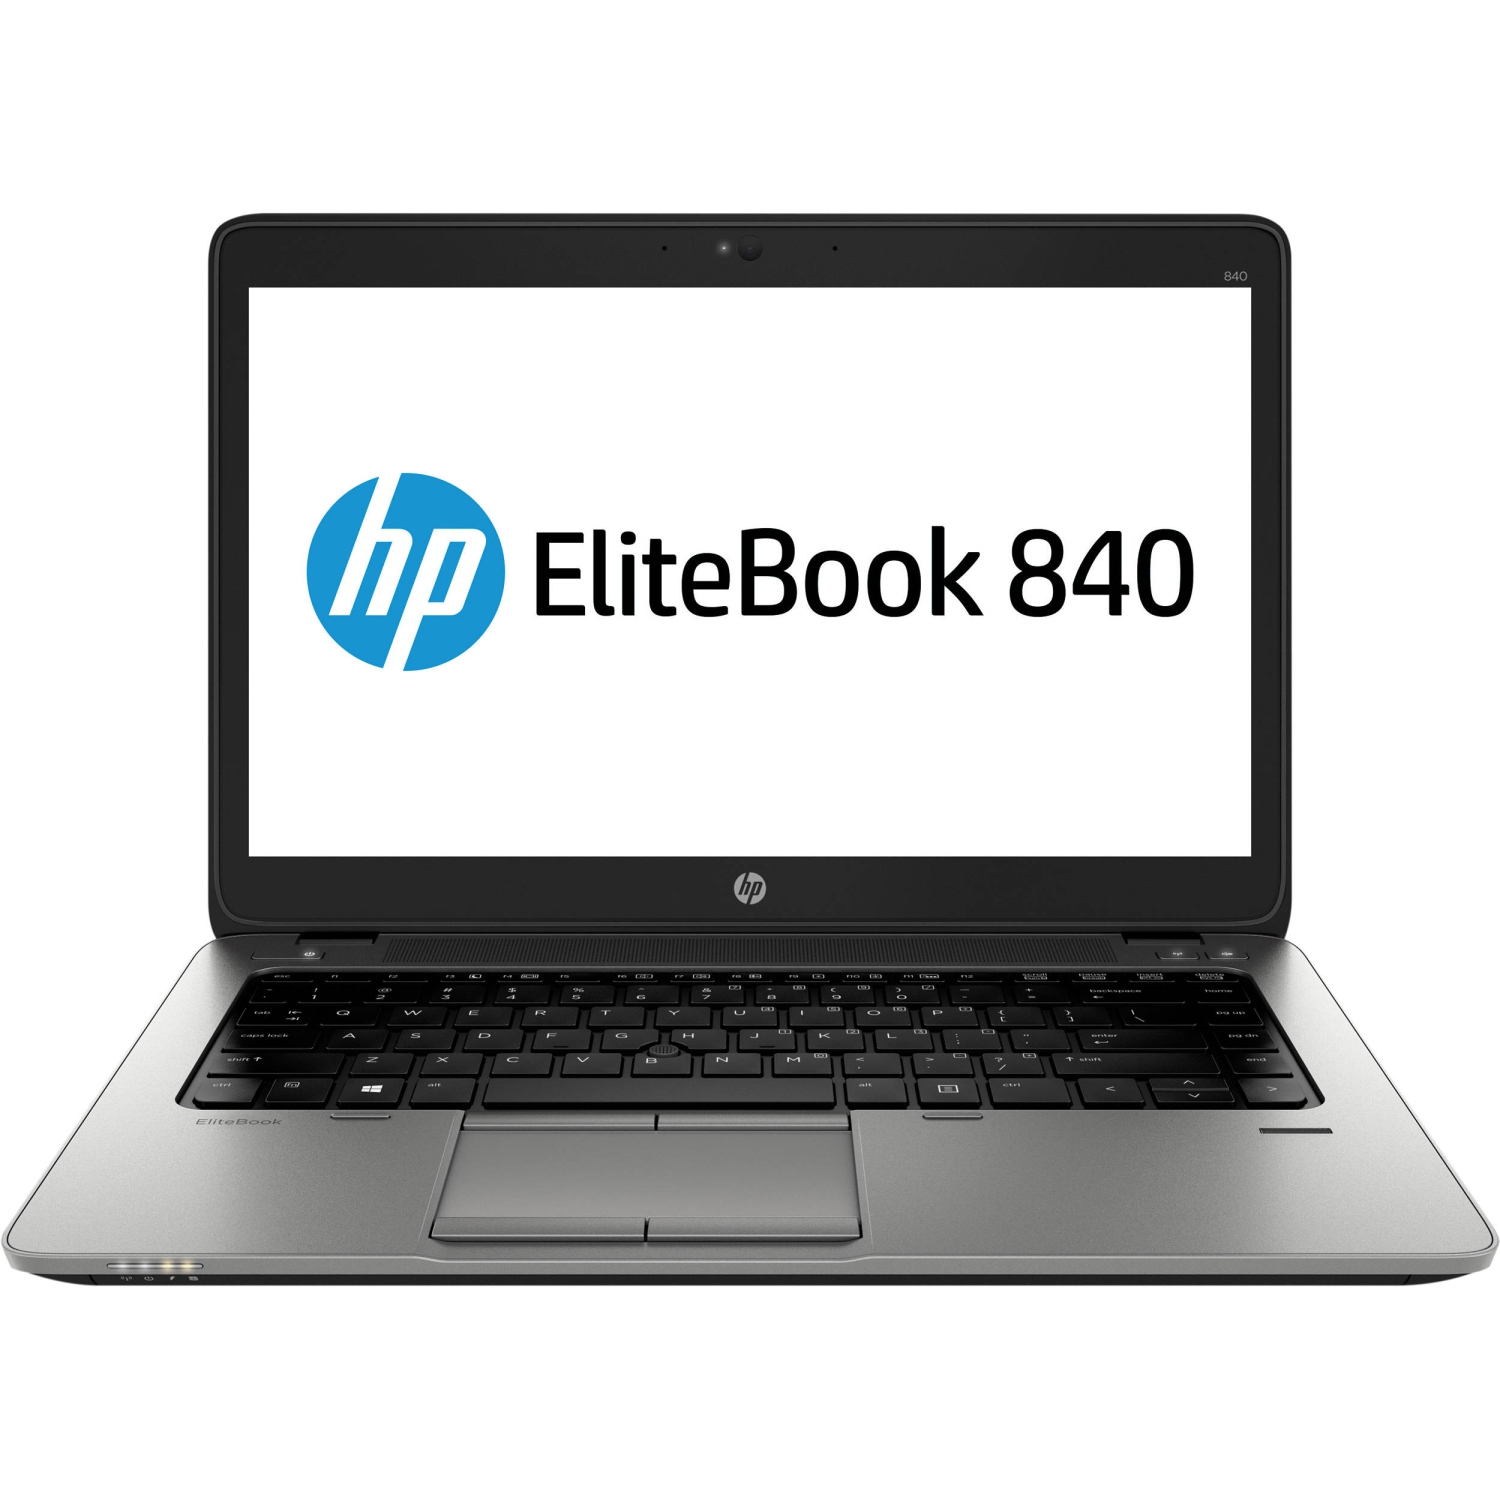 HP ELITEBOOK 840 G4 i5 7300U 2.60GHZ 8GB RAM 500GB HDD LIGHT AND PORTABLE - WEBCAM DELETE FROM FACTORY-